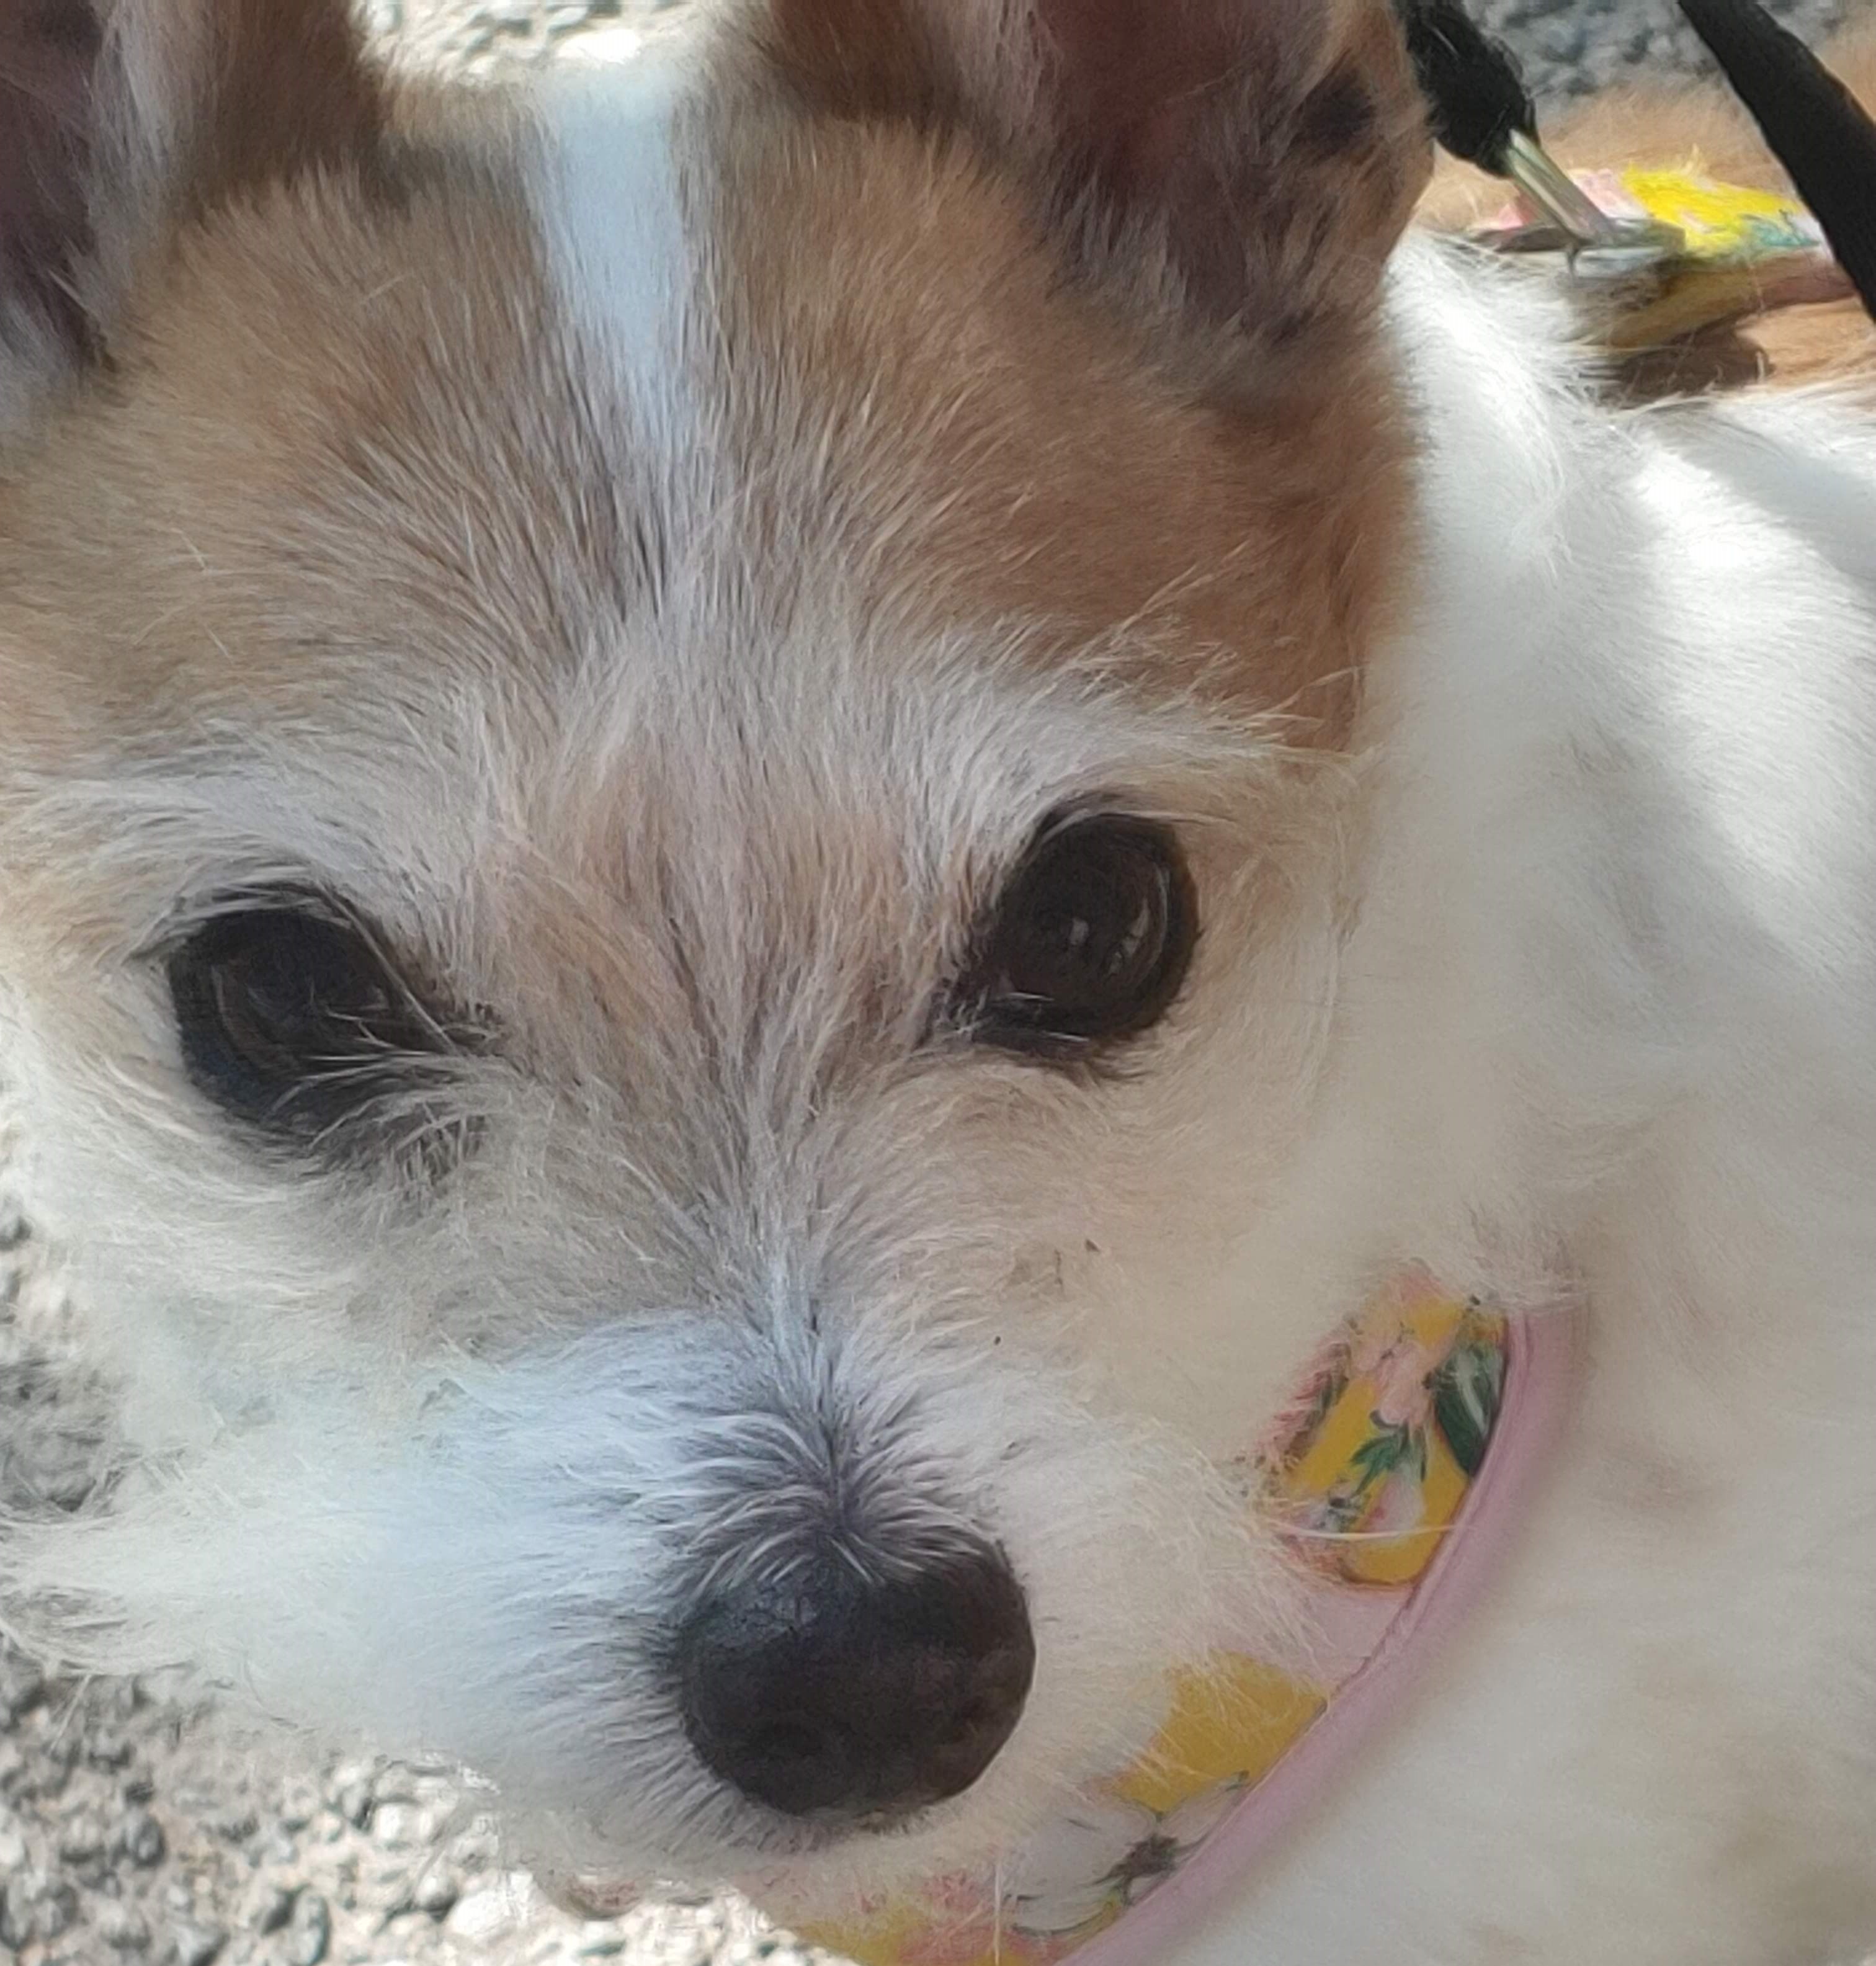 A close-up photo of a small white and brown dog with a pink and yellow harness on.